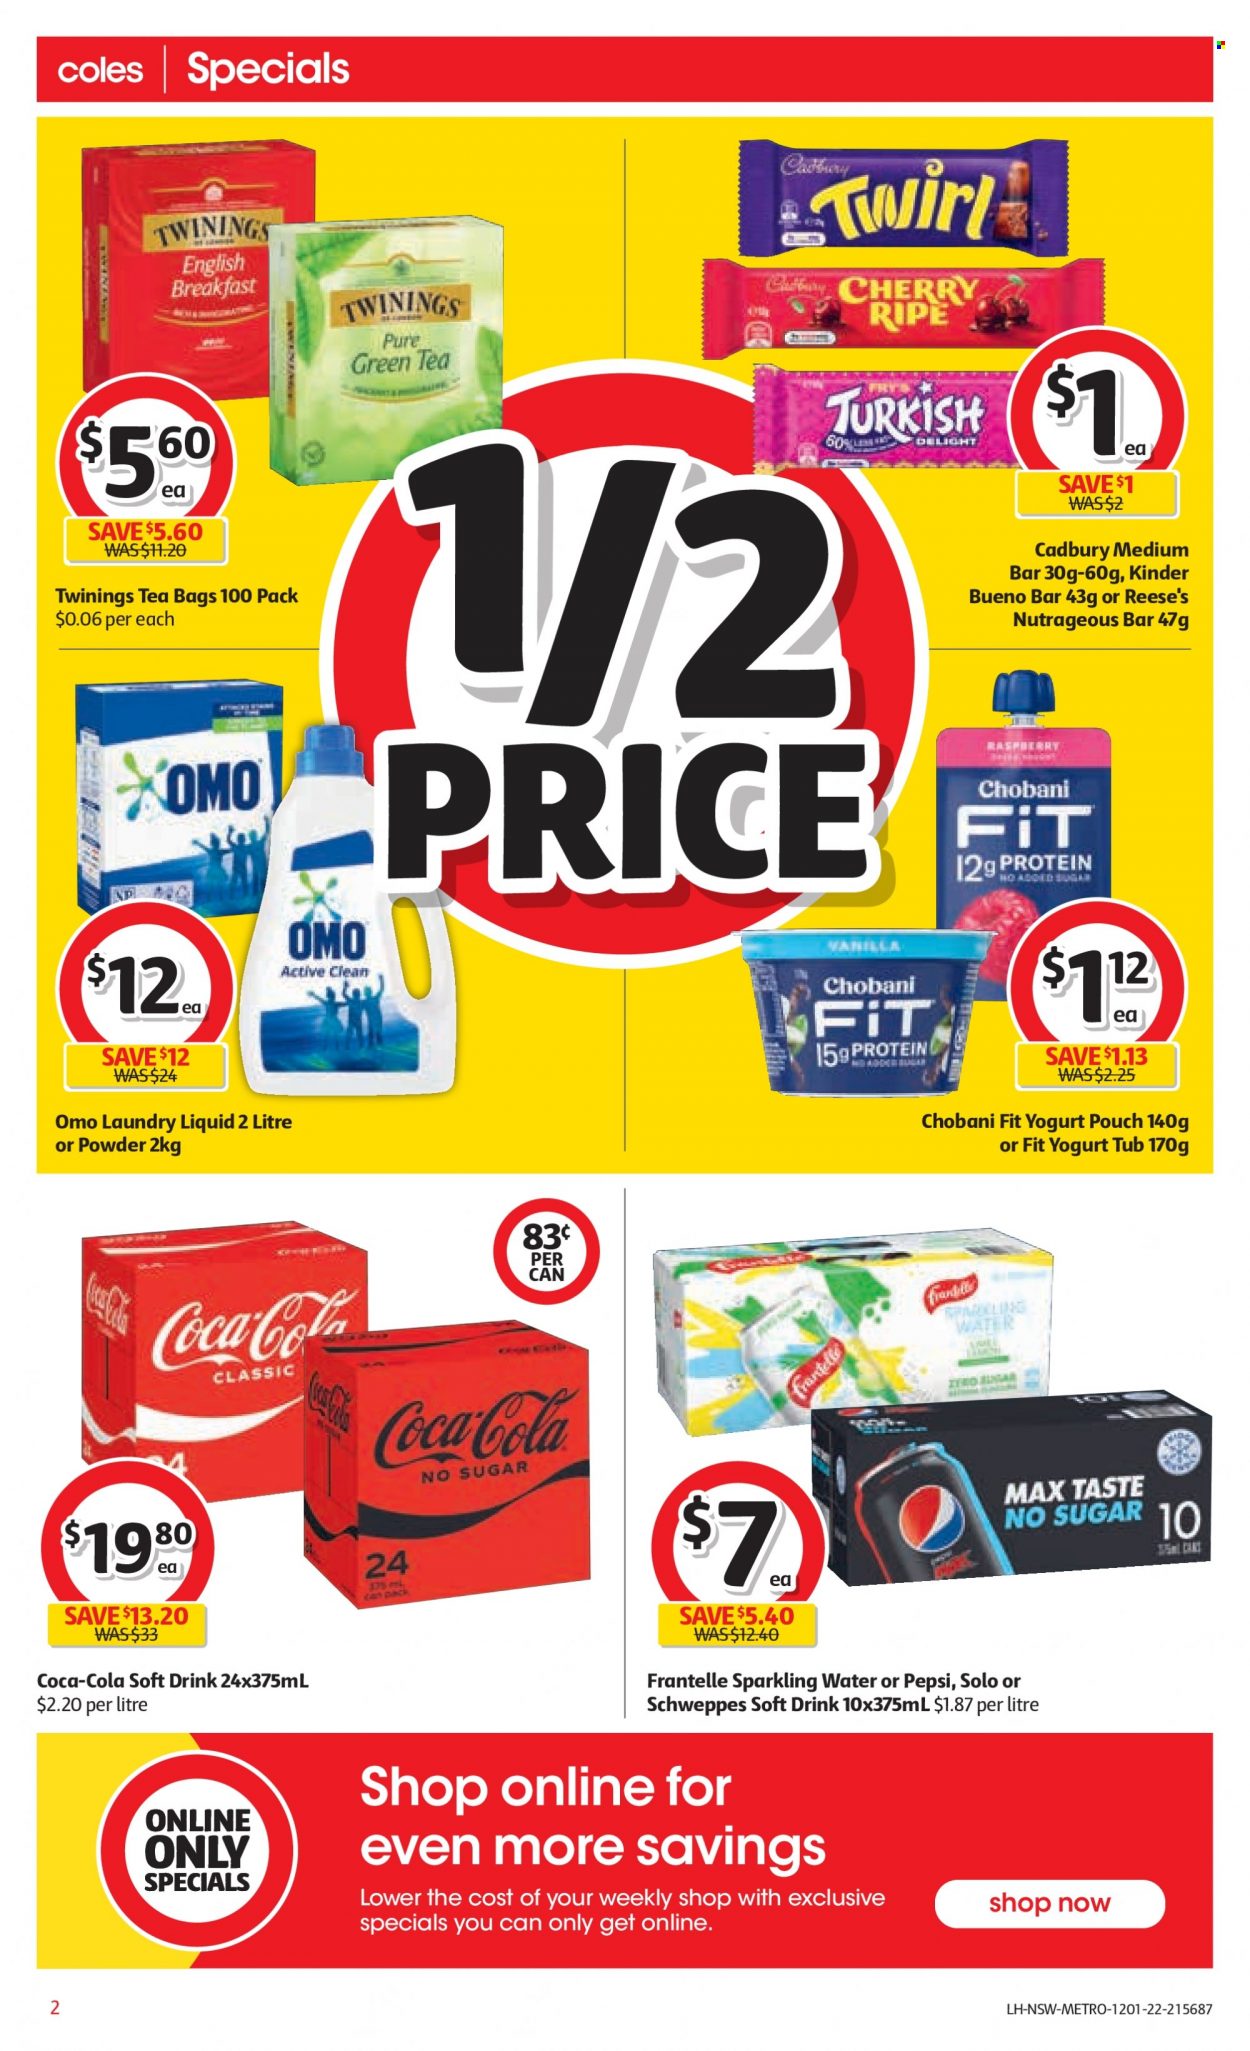 thumbnail - Coles Catalogue - 12 Jan 2022 - 18 Jan 2022 - Sales products - cherries, yoghurt, Chobani, Reese's, Kinder Bueno, Cadbury, Coca-Cola, Schweppes, Pepsi, soft drink, sparkling water, green tea, tea bags, Twinings, Omo, laundry detergent. Page 2.